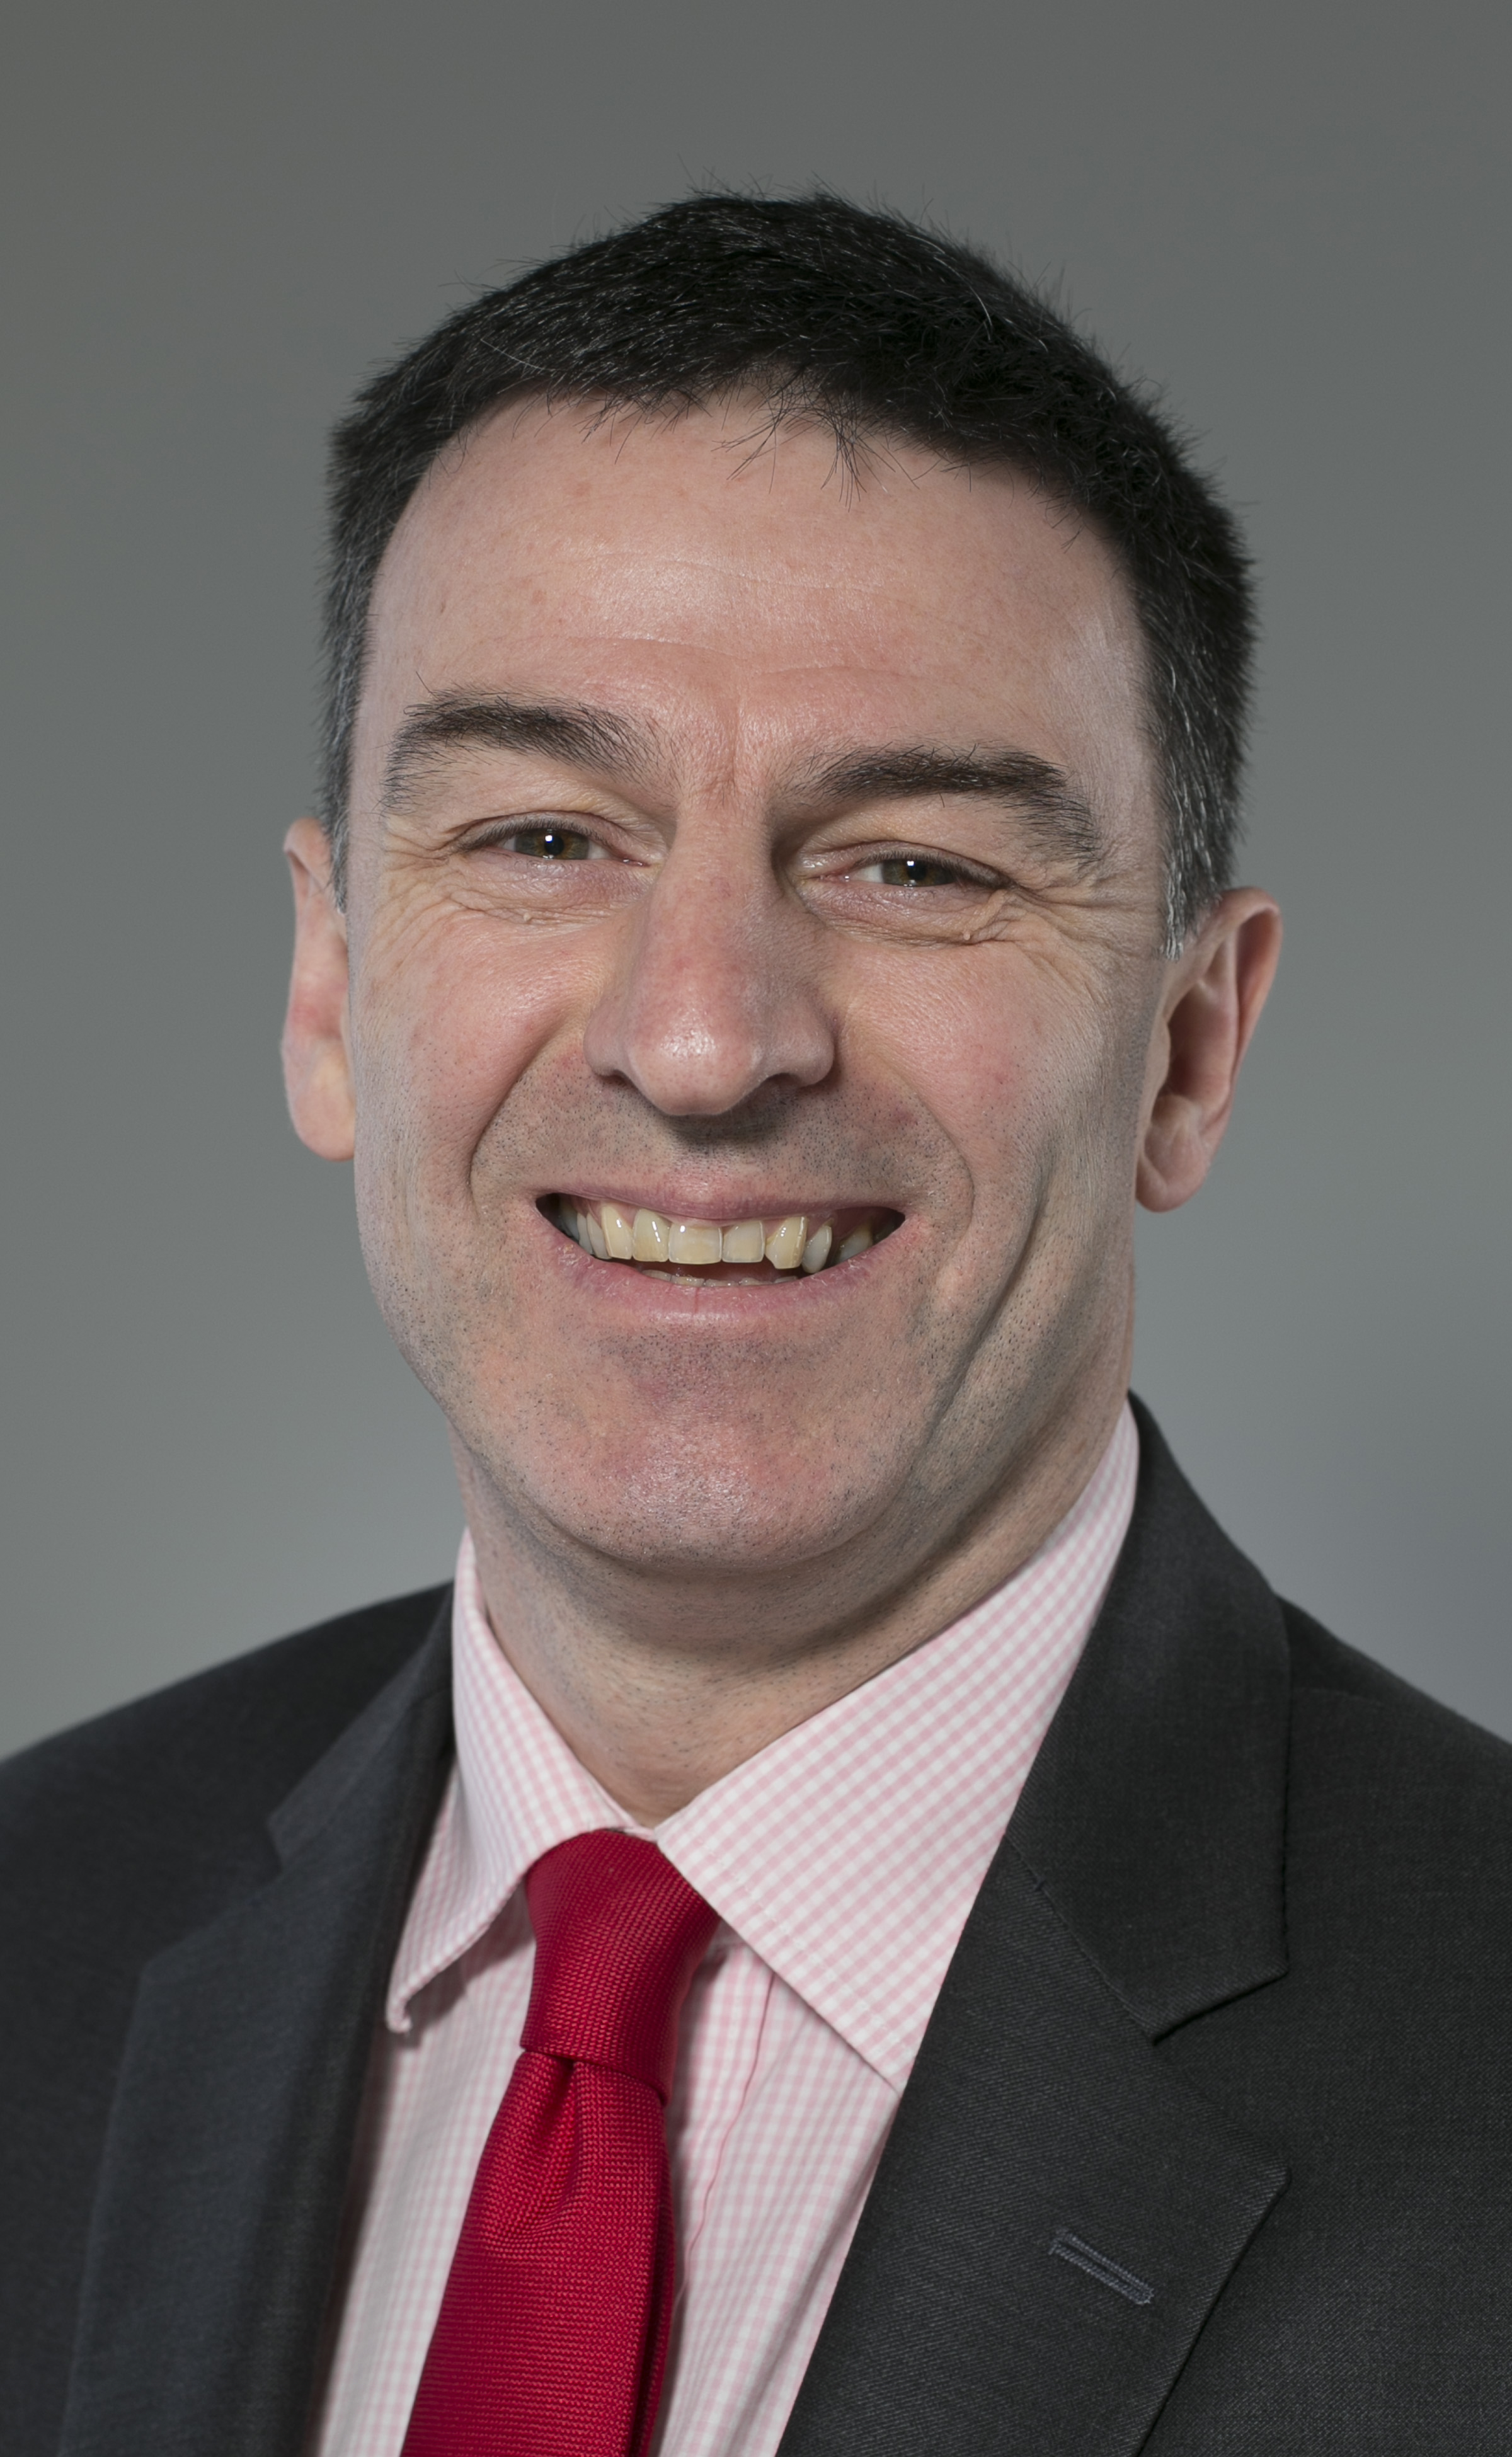 Scottish Property Federation appoints Miller Mathieson as new chairman